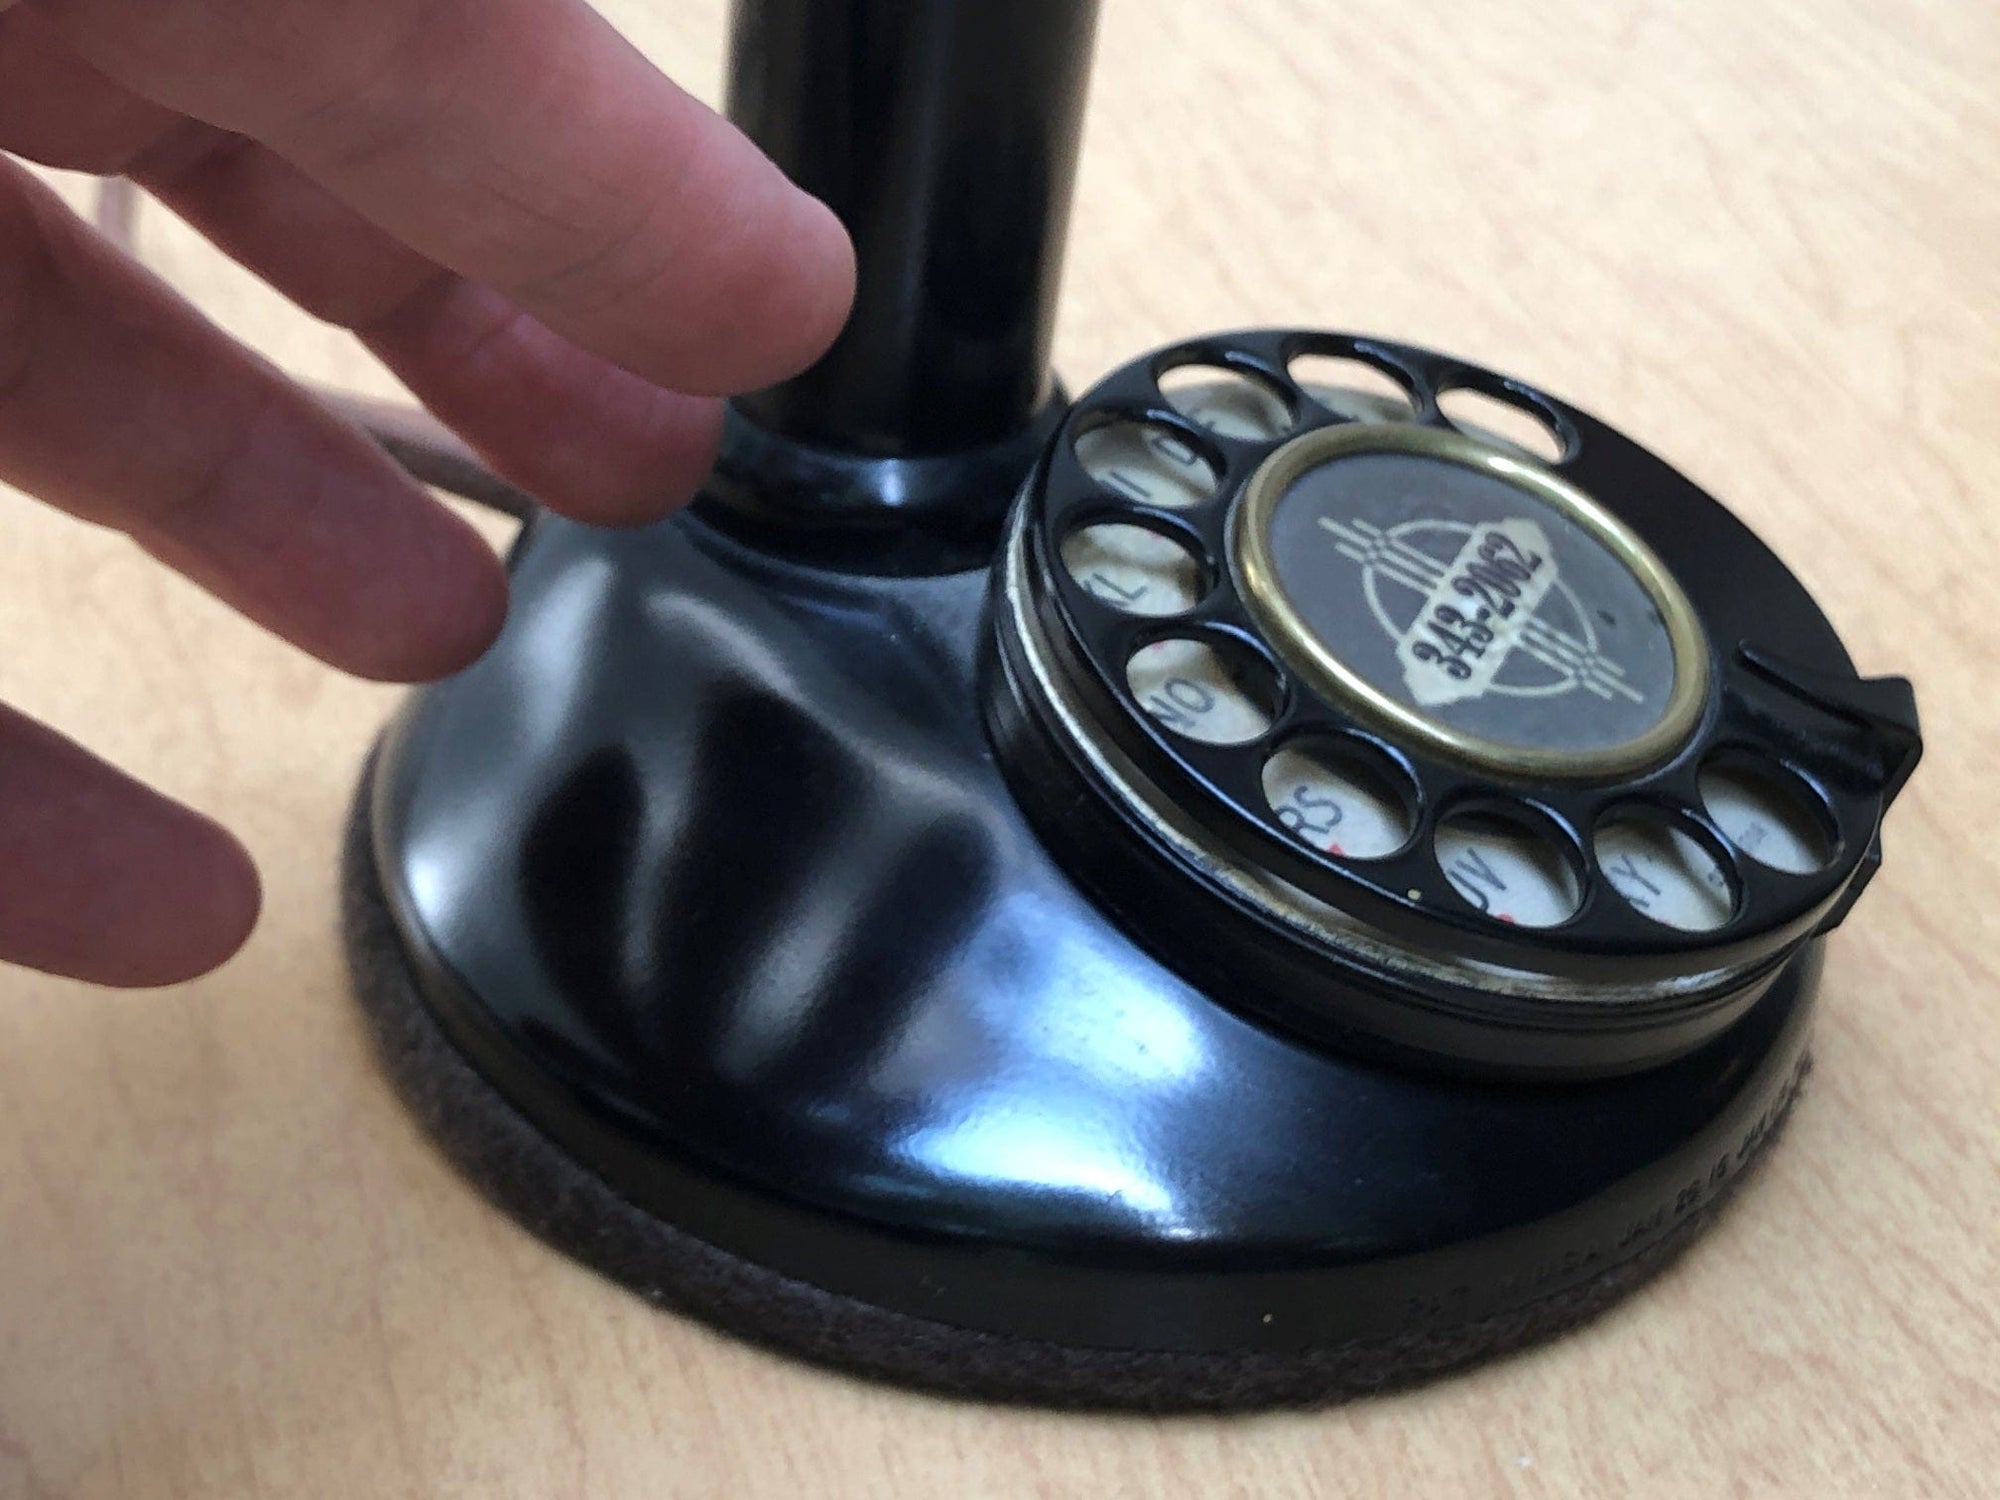 I Like Mike's Mid Century Modern Accessories Western Electric Black Candlestick Telephone circa 1913, Professionally Refurbished